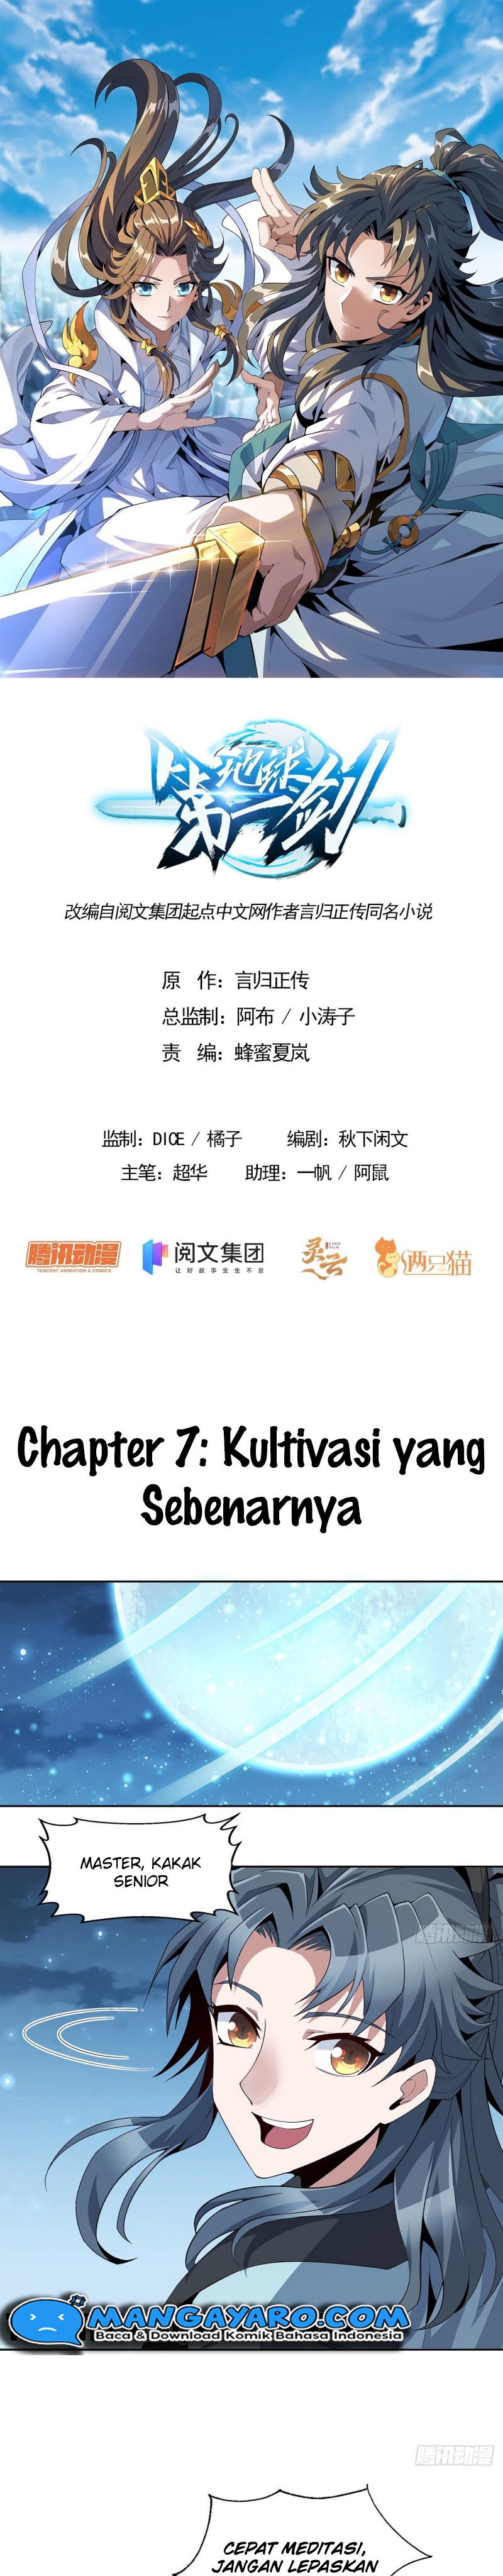 The First Sword of Earth Chapter 7